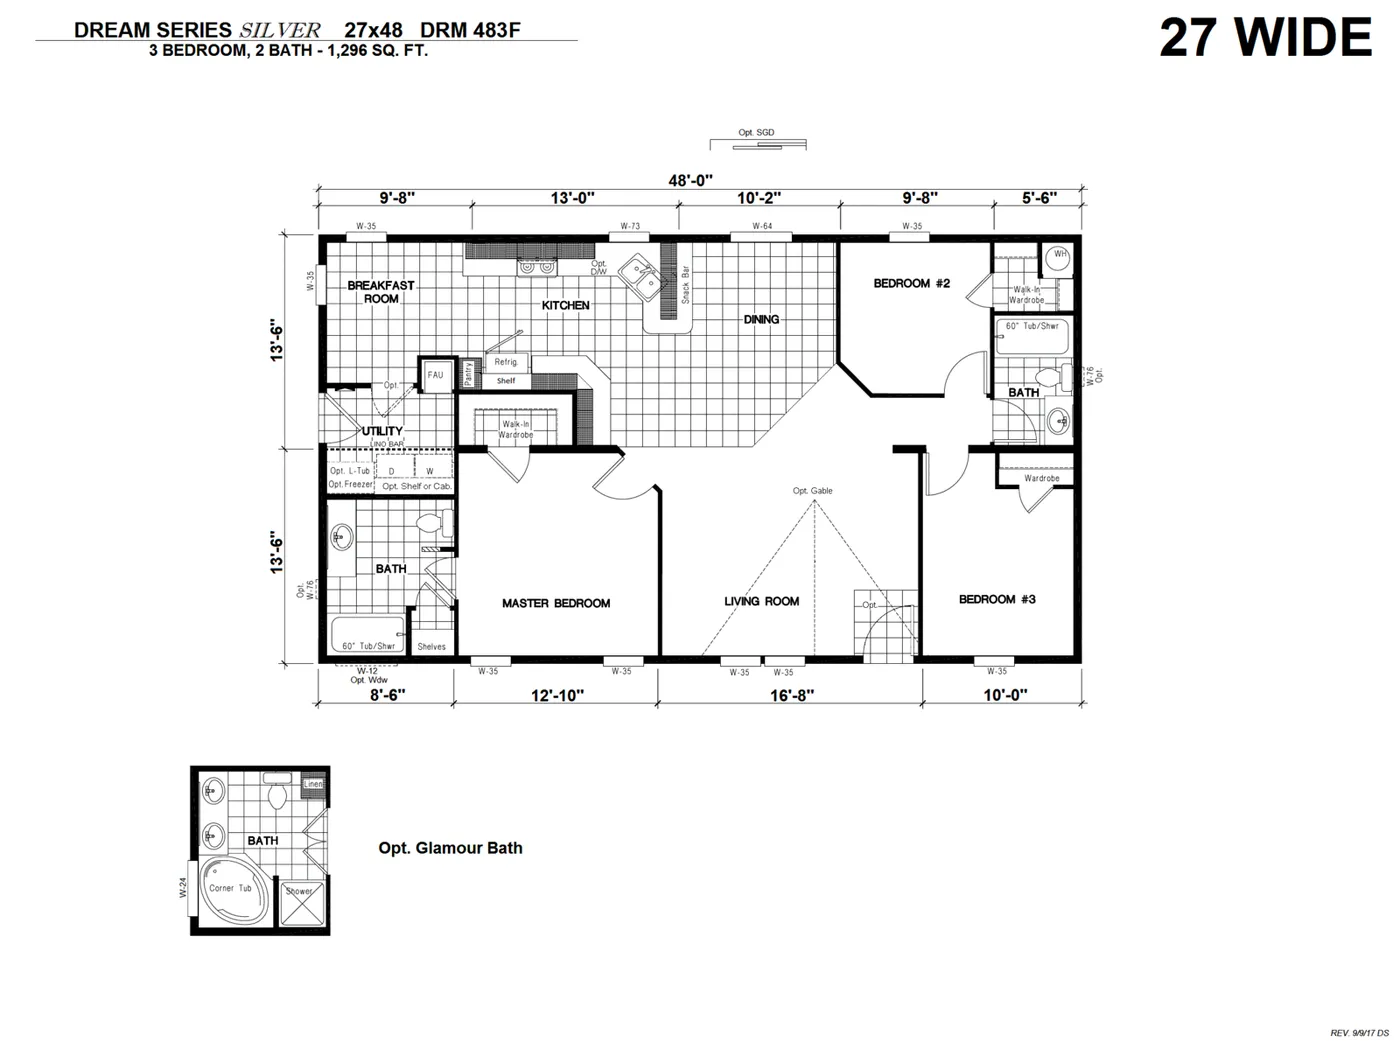 The DRM483F 48' DREAM Floor Plan. This Manufactured Mobile Home features 3 bedrooms and 2 baths.